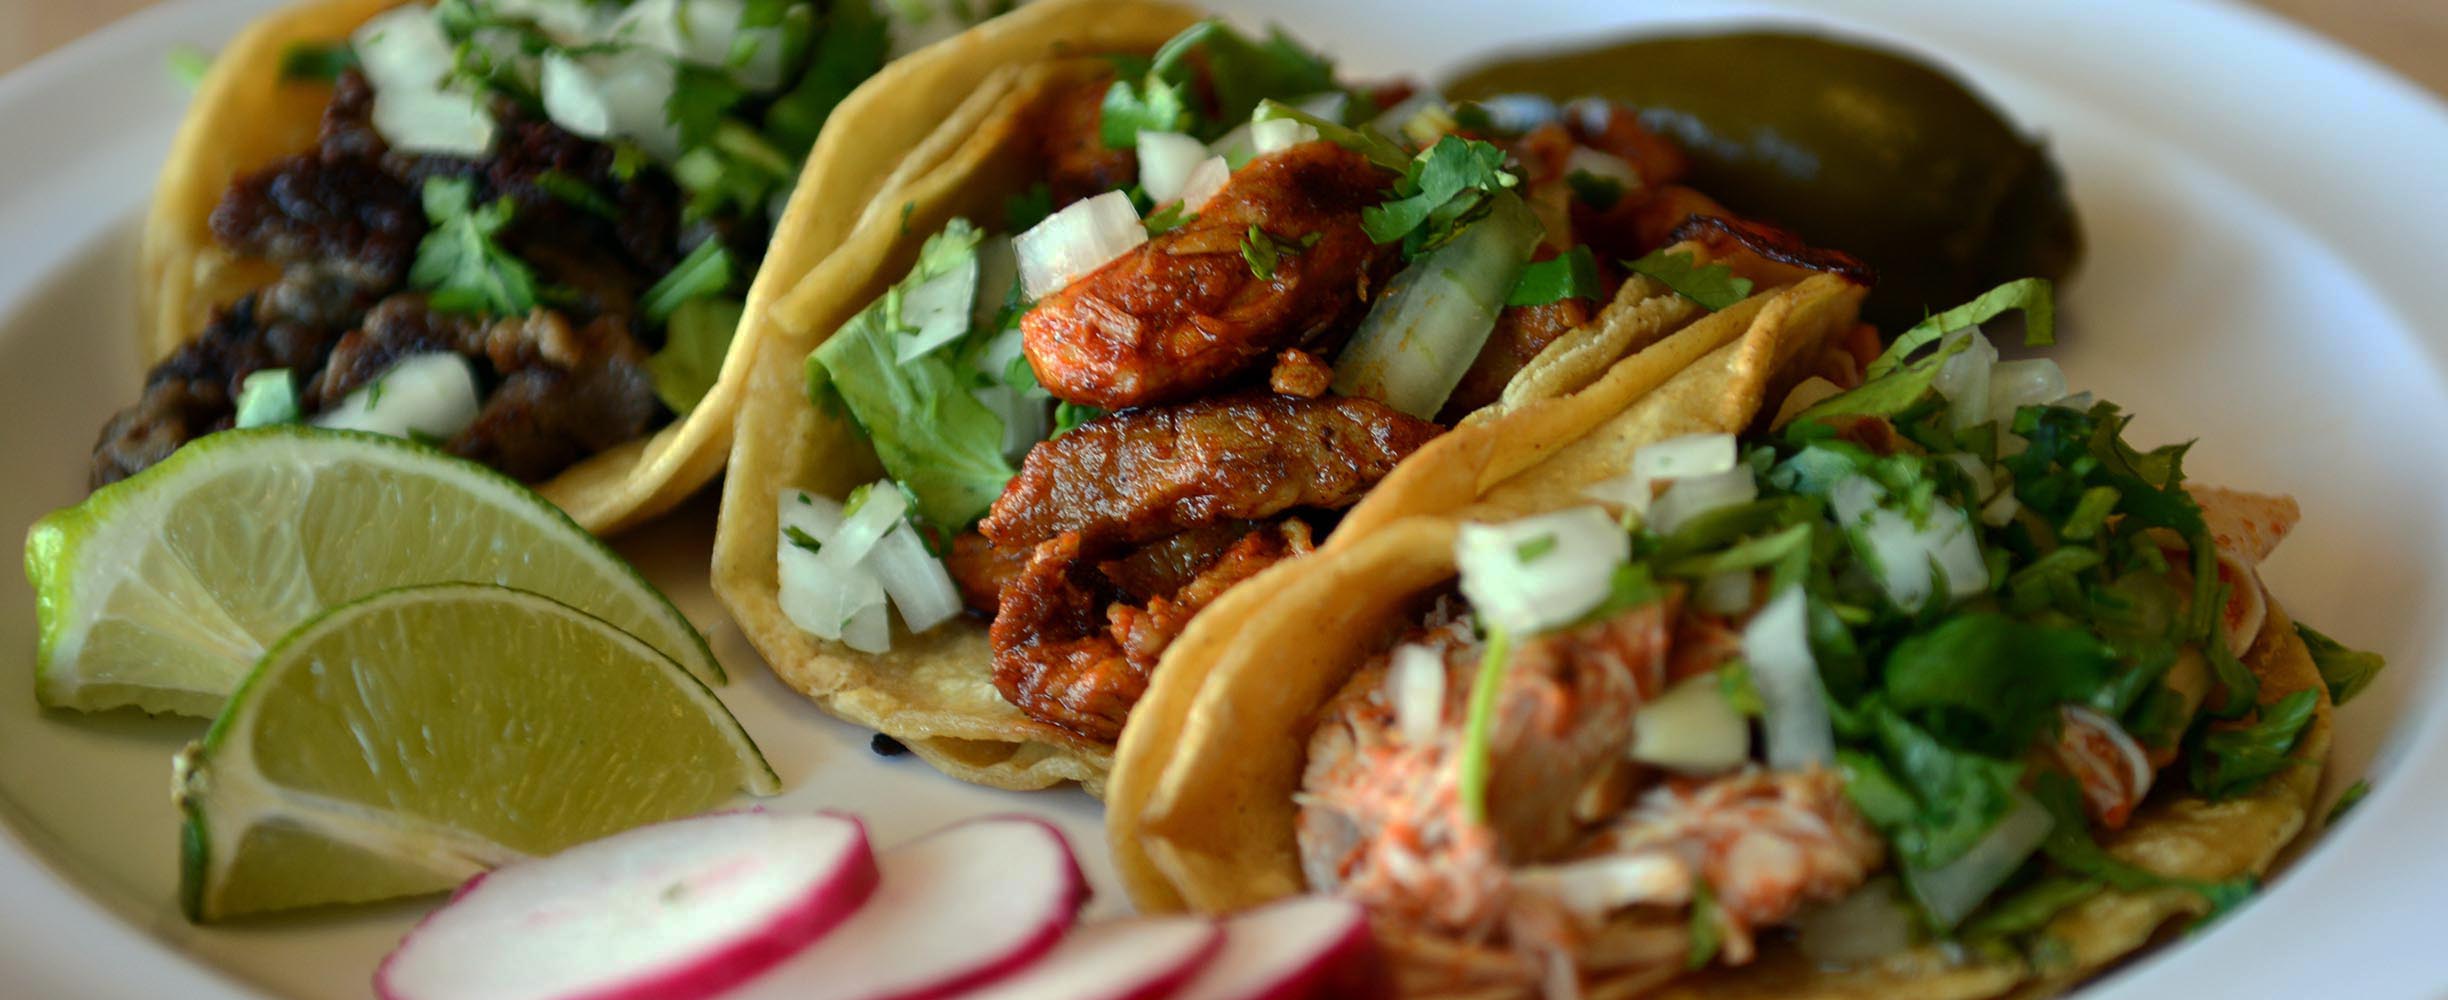 Our Tacos and Taquitos are true Mexican style.